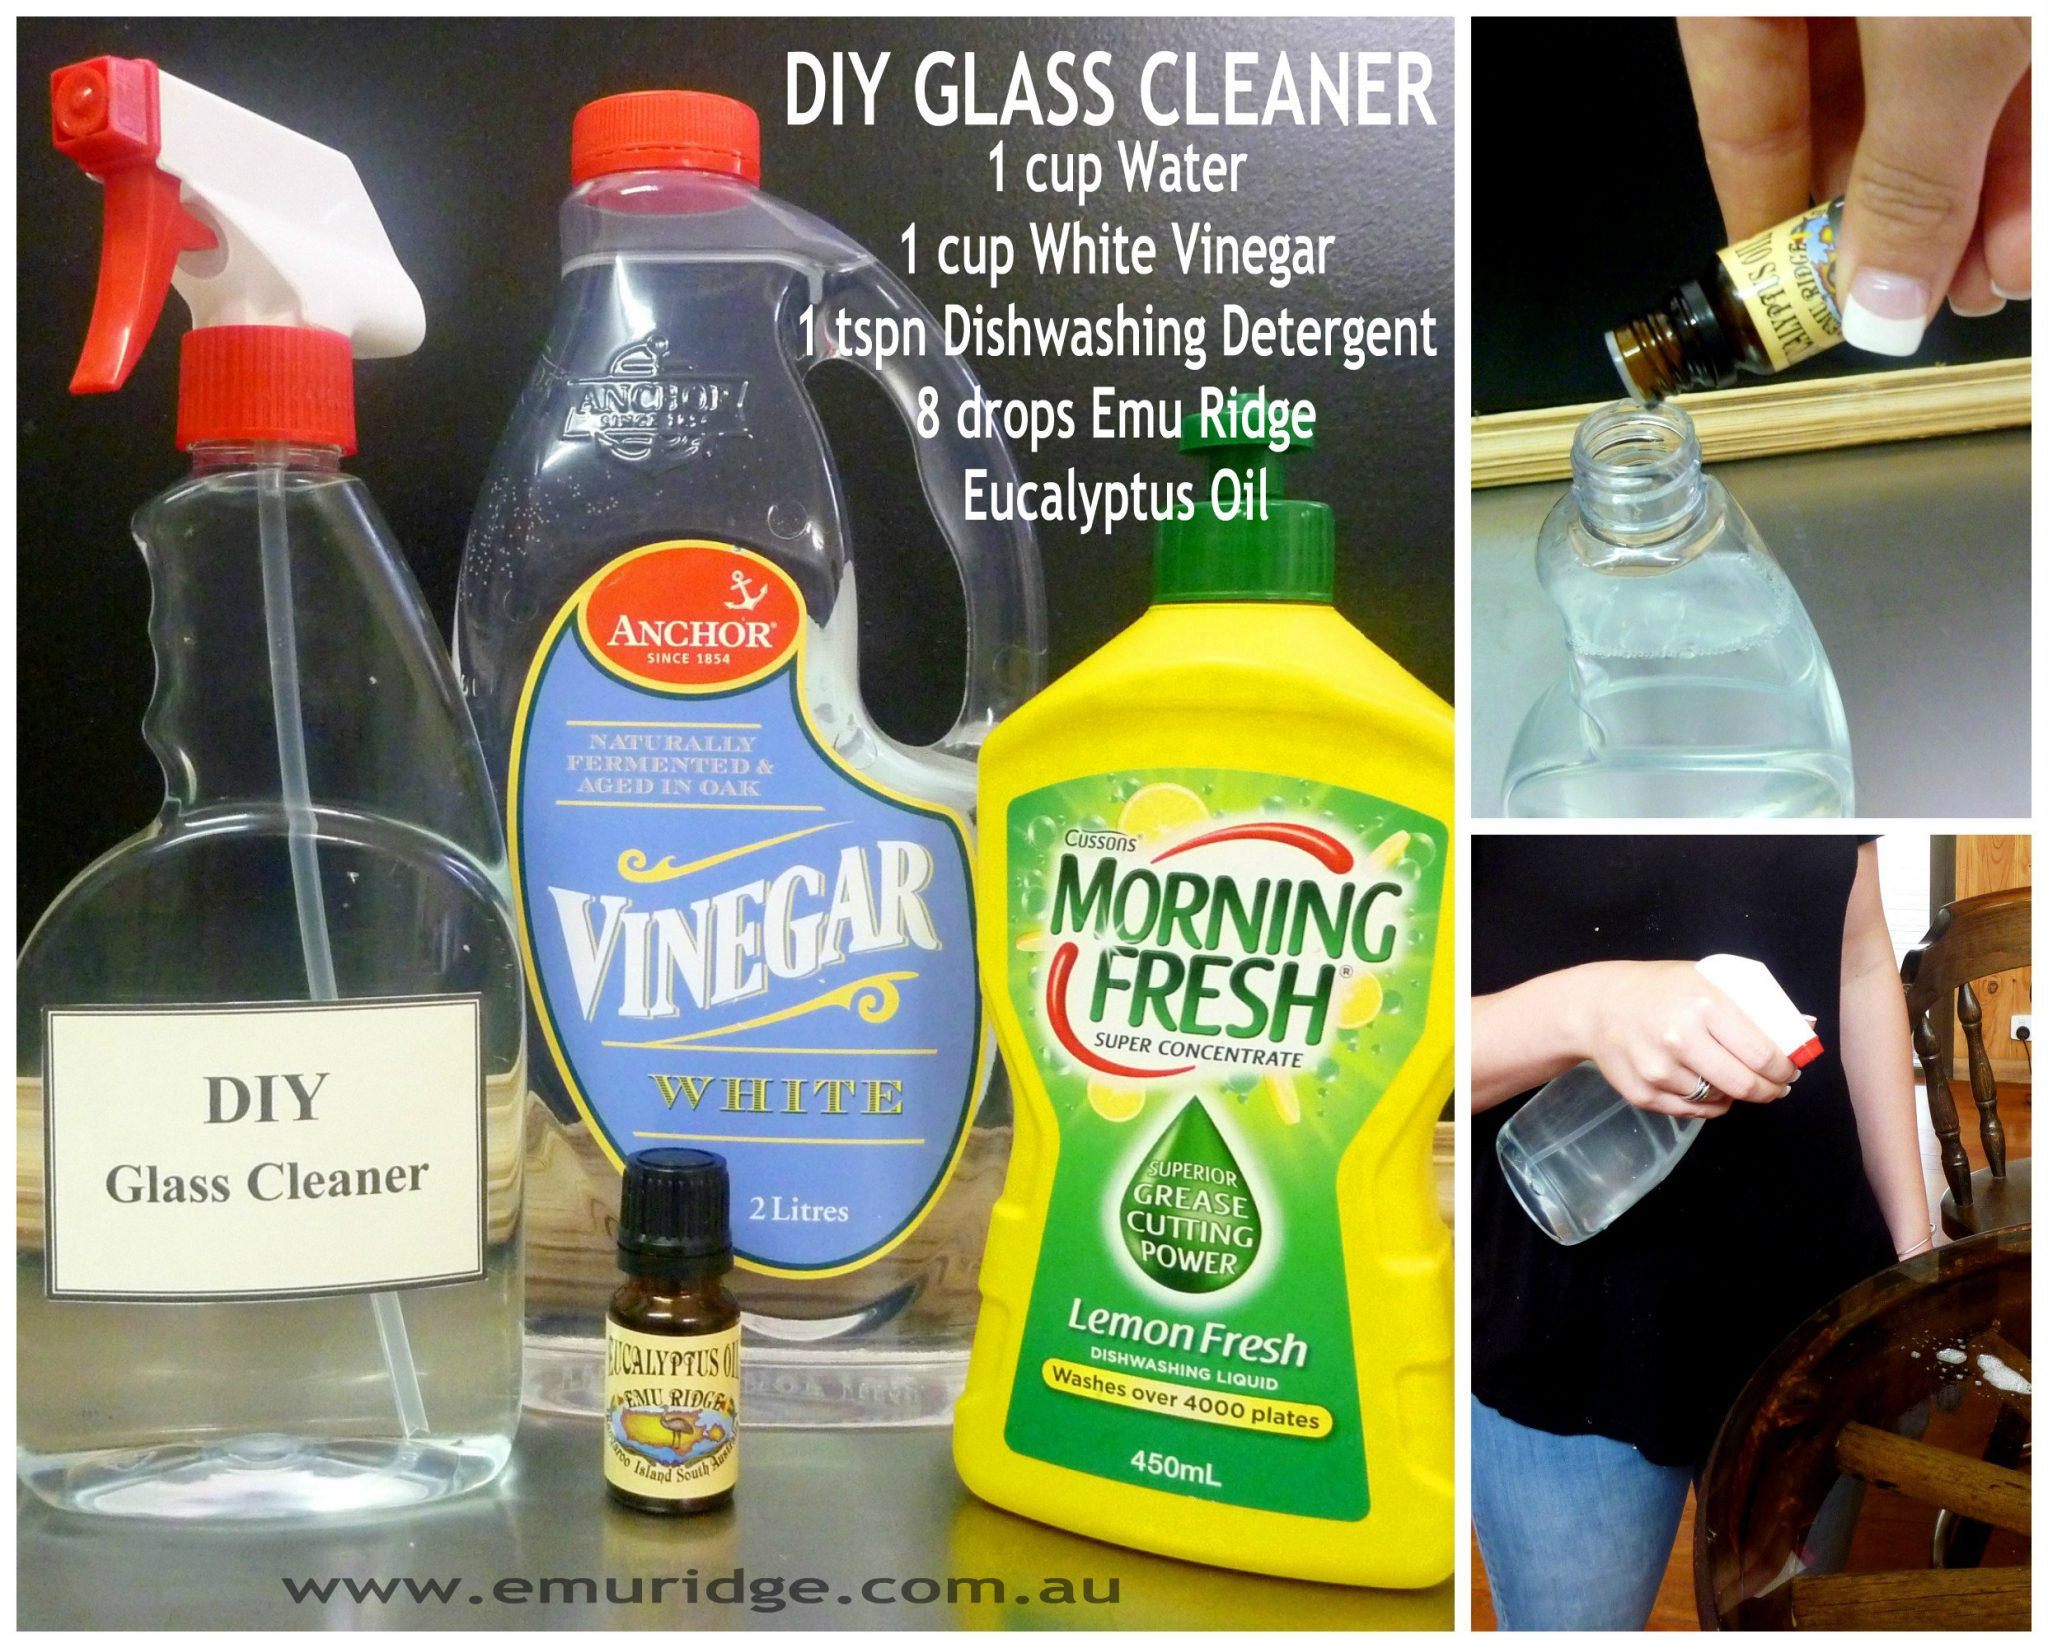 DIY Glass and Window Cleaner - Realizing Home